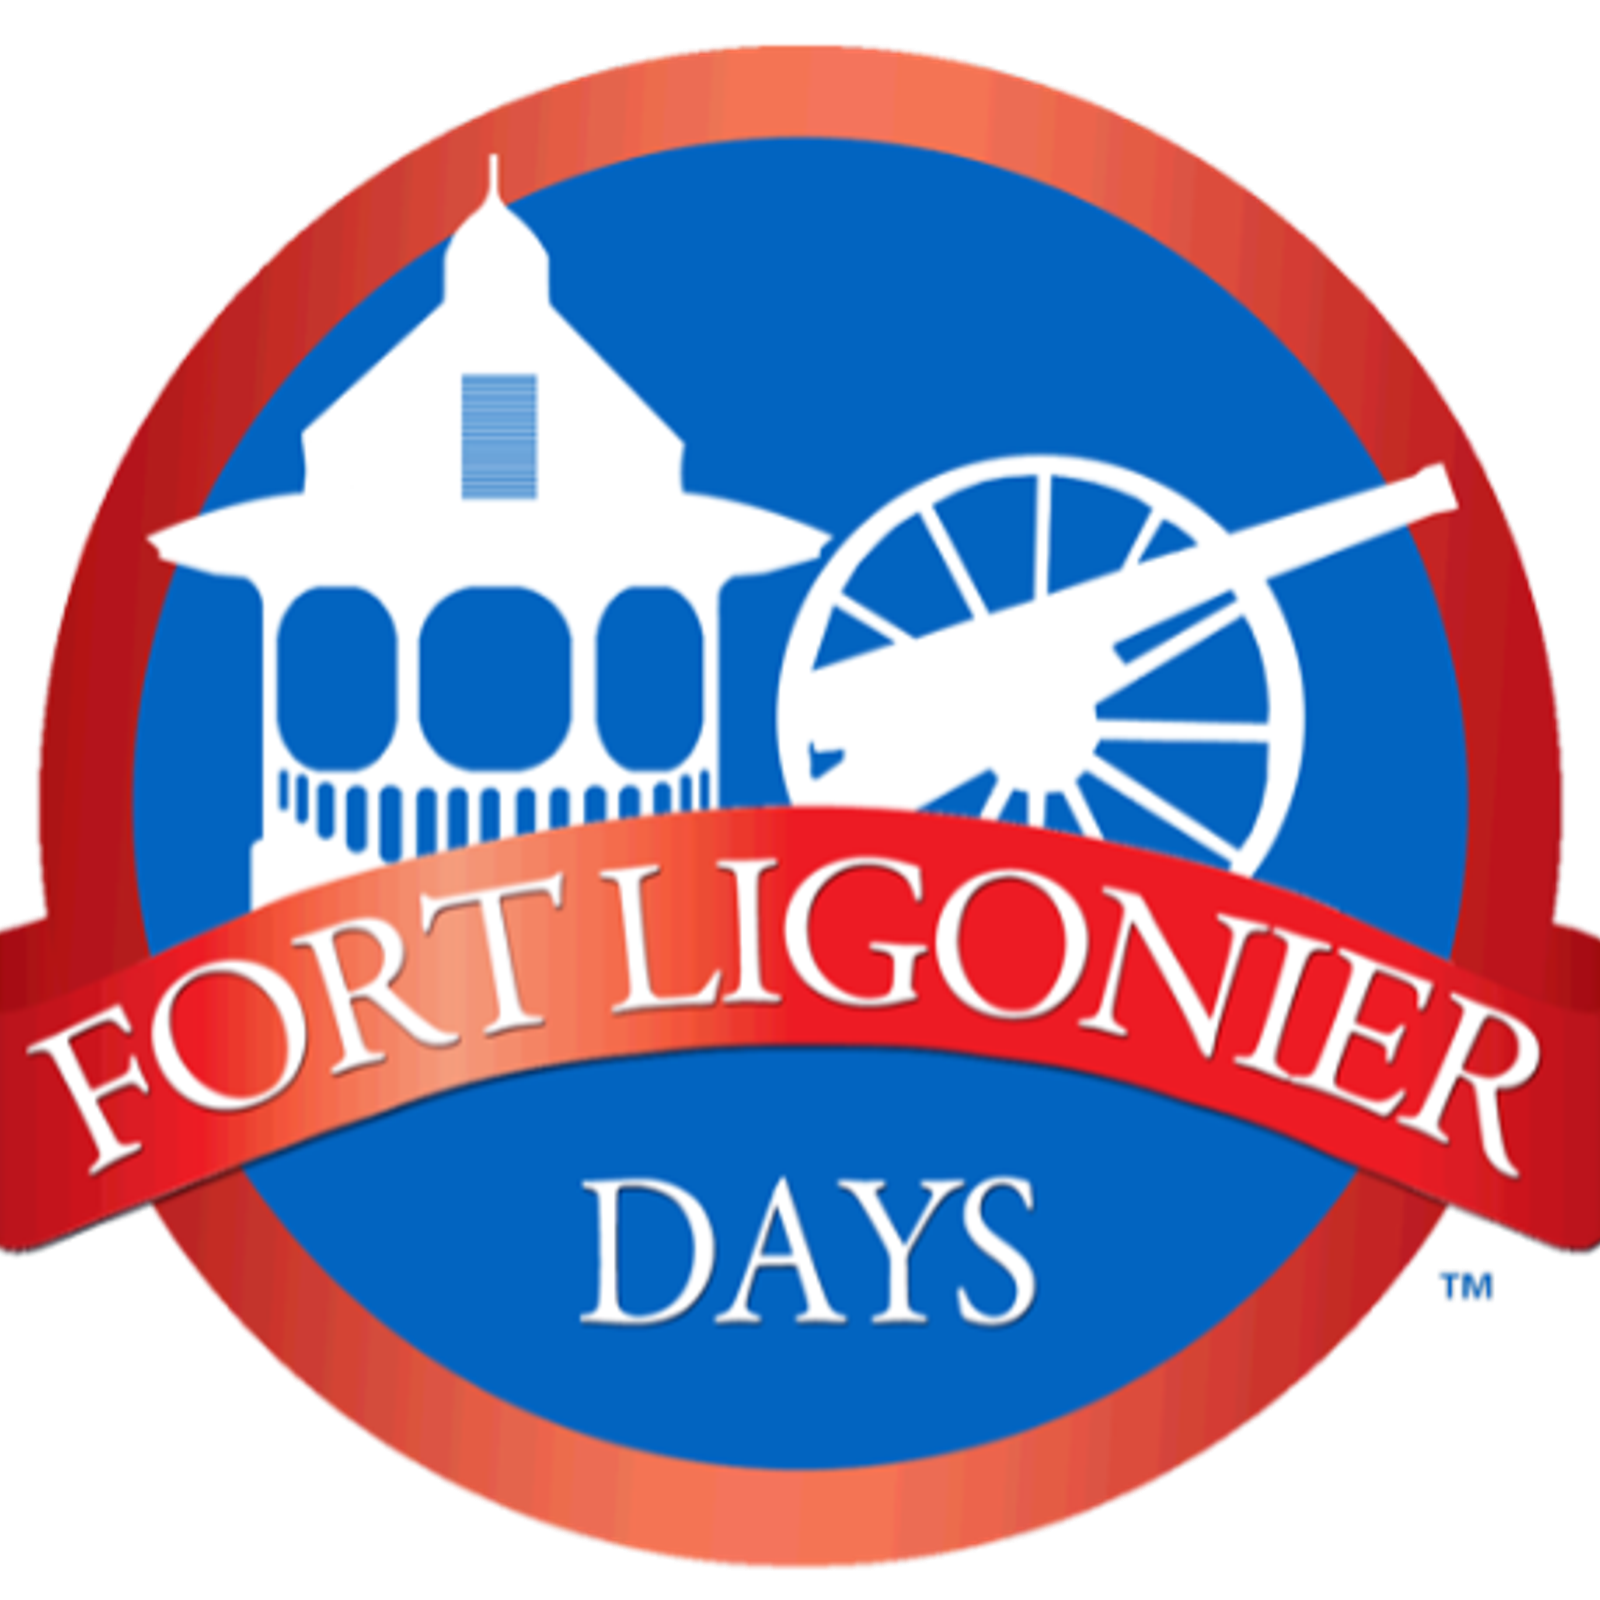 Fort Ligonier Days, Parade and 5K A 3day funfilled family fall festival